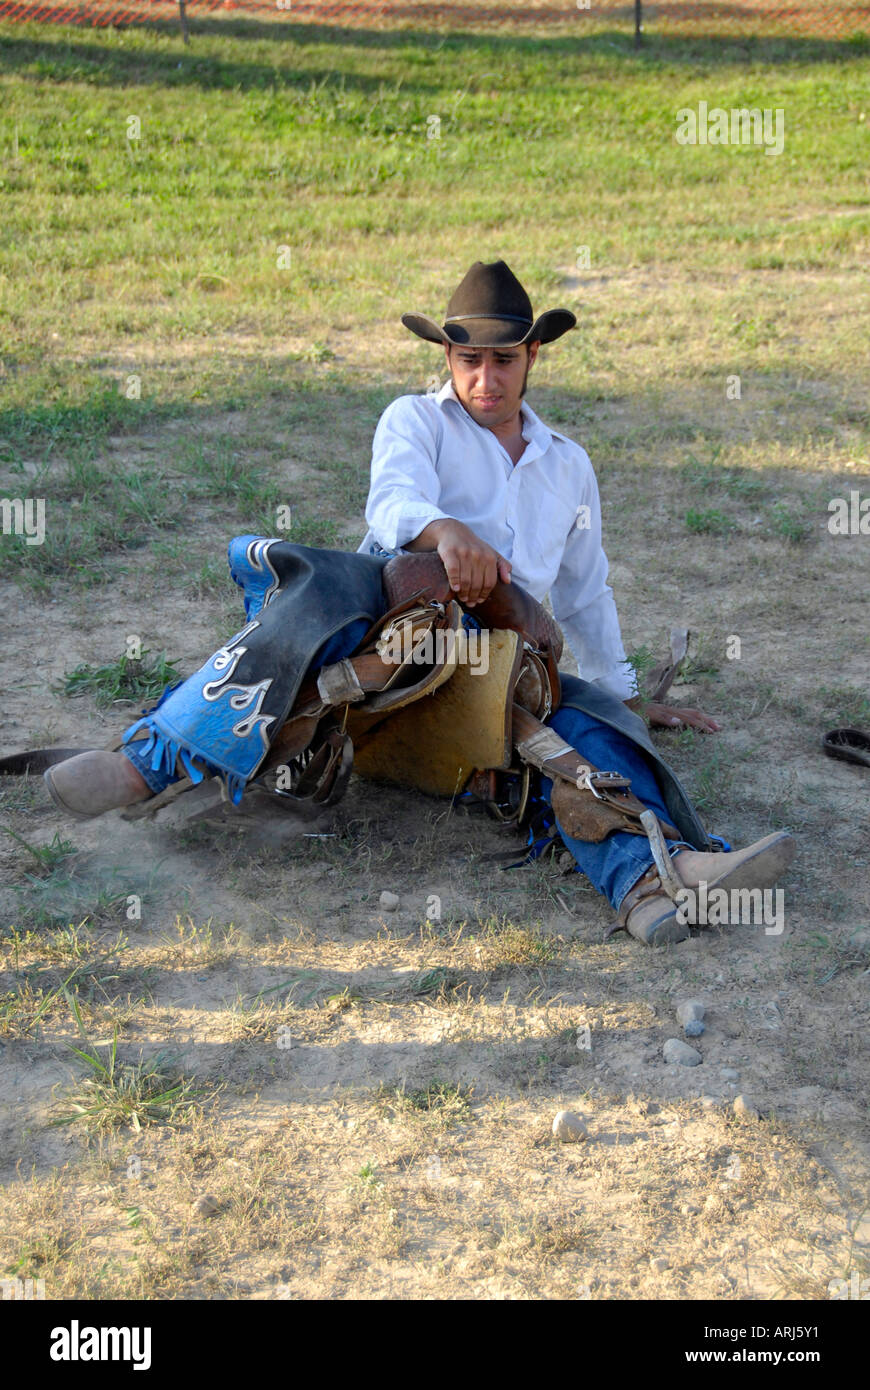 Cowboy practices holding onto his saddle prior to a bronco riding event at a Rodeo Stock Photo